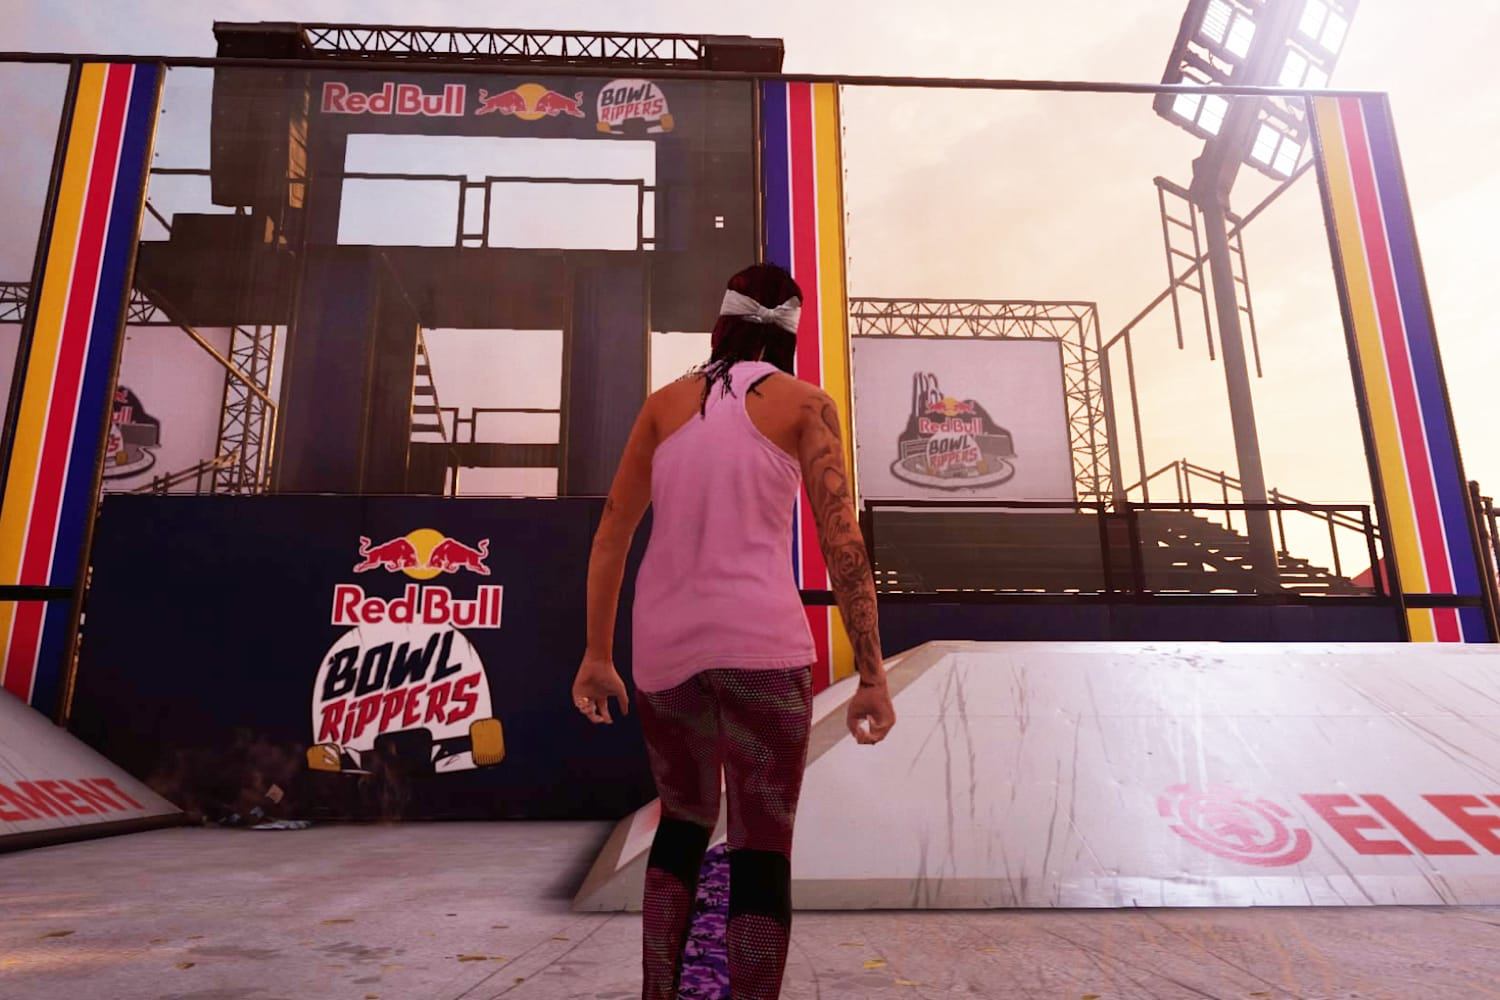 Learn How To Get Rewards On Tony Hawk’s Pro Skater 1 And 2